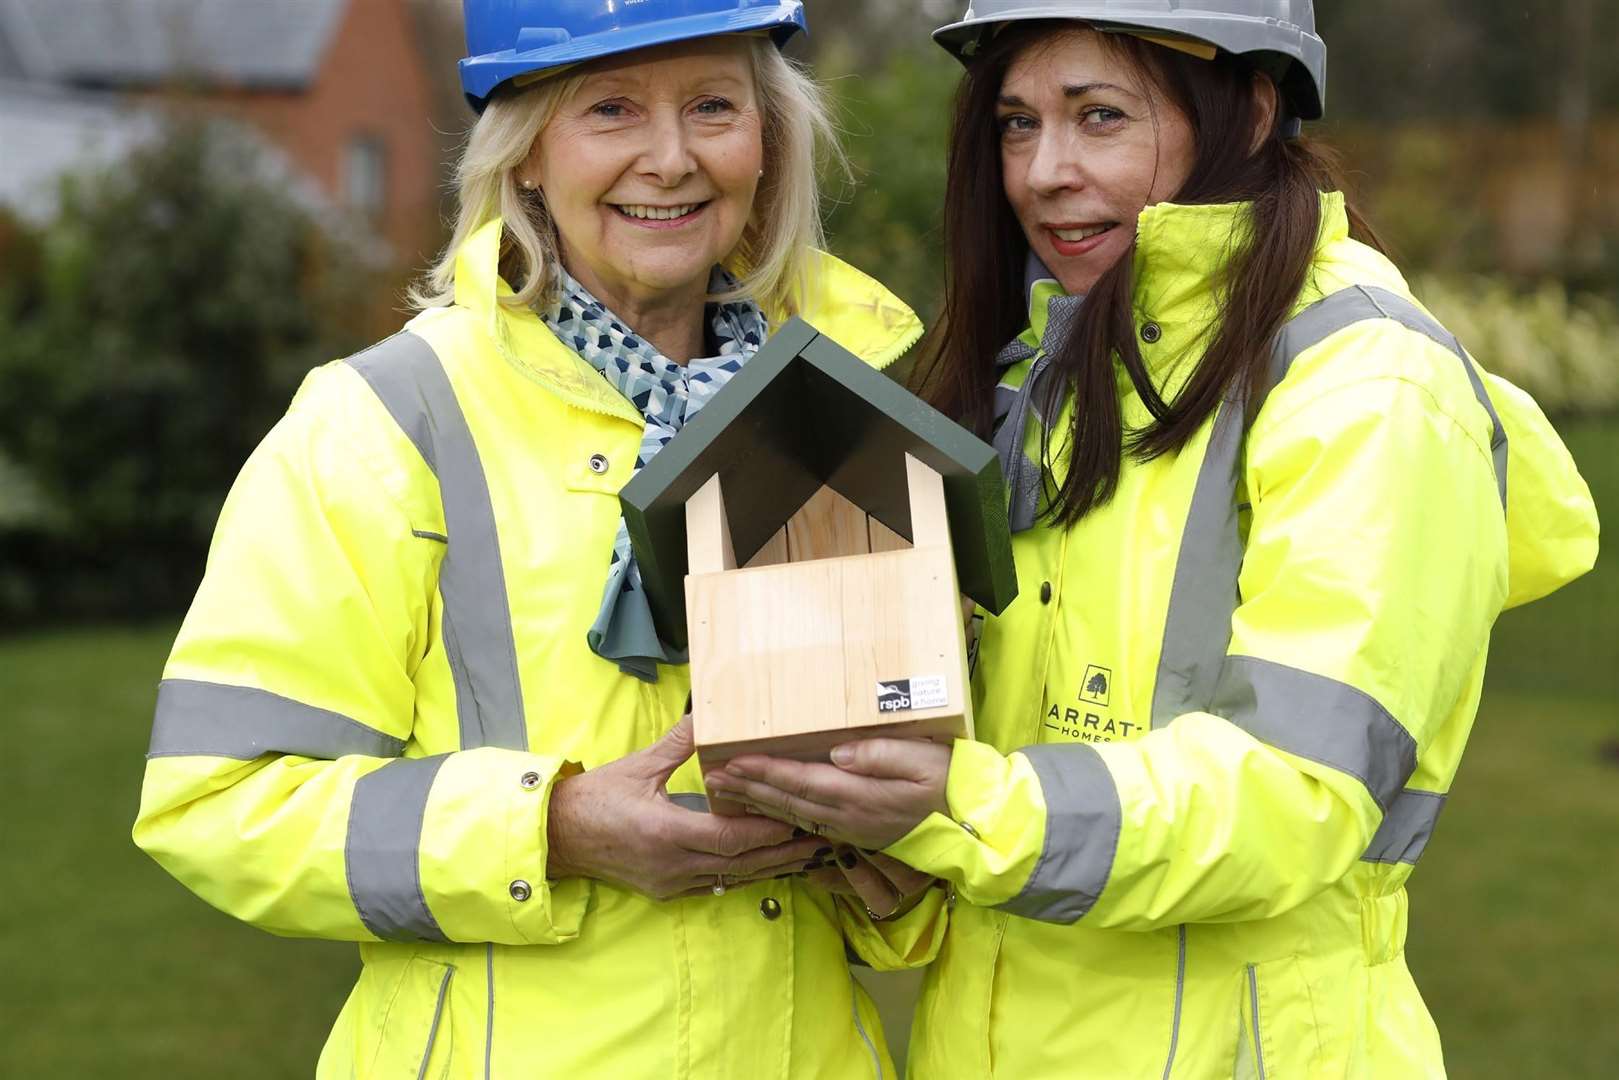 Barratt staff with one of the nest boxes fitted (1393378)